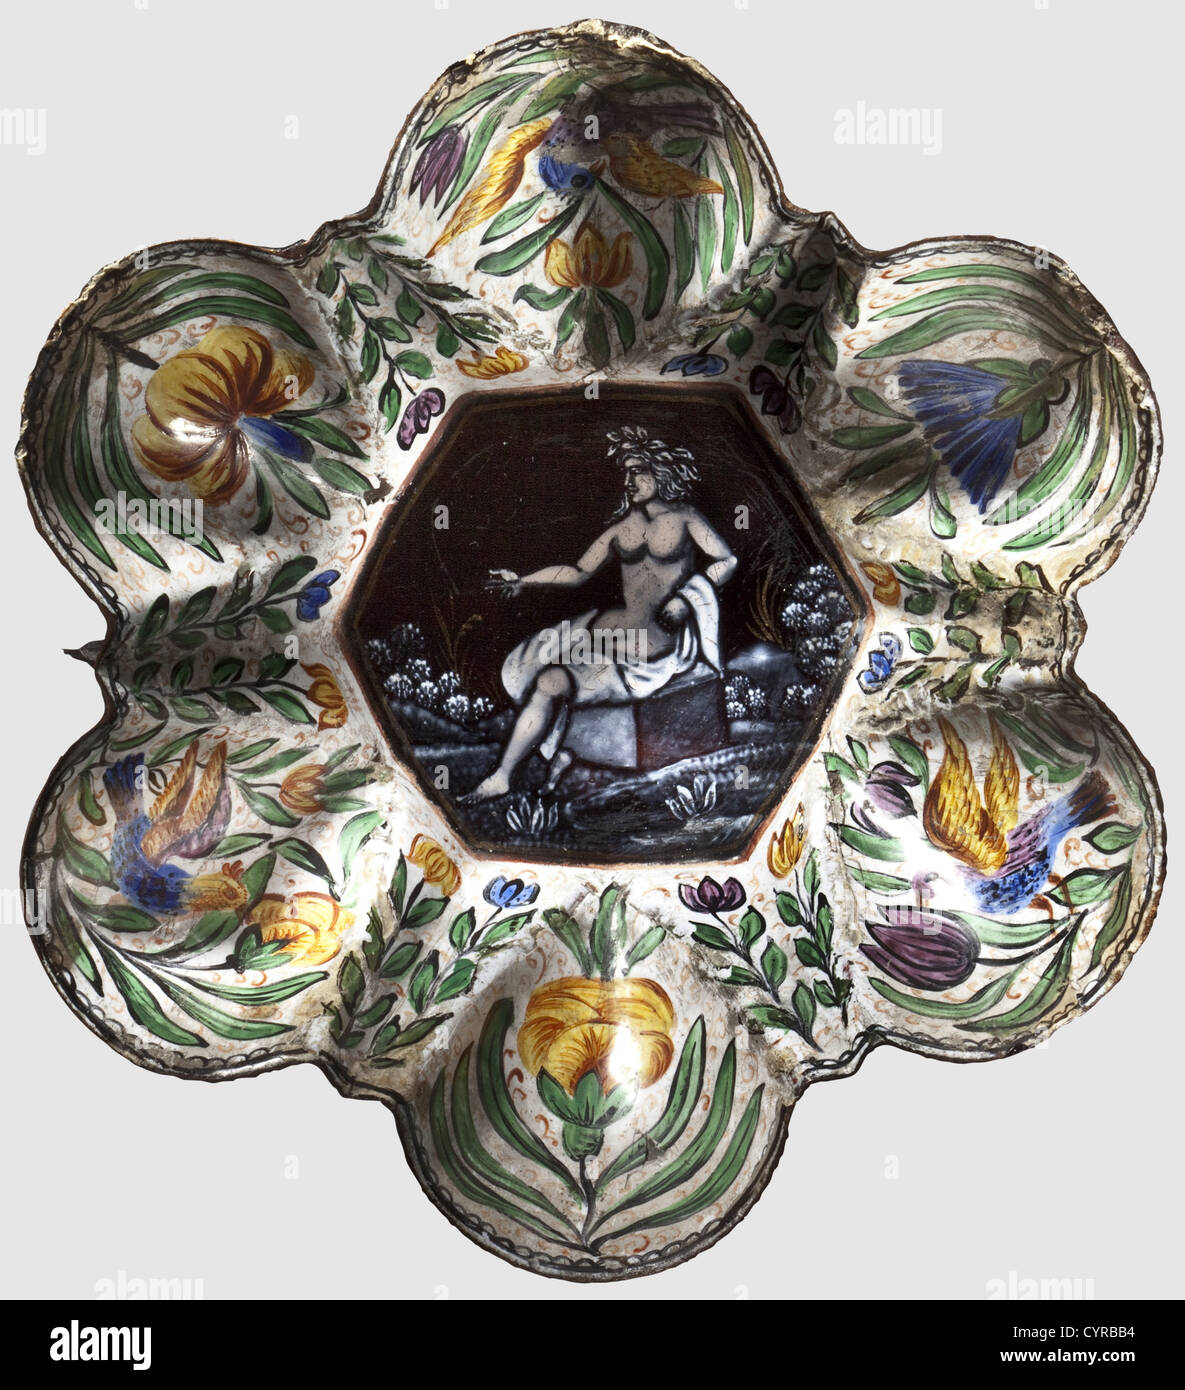 A French enameled tastevin, Limoges, circa 1600 An enameled copper cup formed with six bulging sections. Hexagonal central field displaying the figure of a seated woman in grisaille painting, coloured flowers and birds on the six surrounding cavities. The bottom painted with golden stars and decorative vines on a black background. Edges dented and restored in places. Diameter 13.5 cm, historic, historical,, 17th century, handicrafts, handcraft, craft, object, objects, stills, clipping, clippings, cut out, cut-out, cut-outs, fine arts, art, artful, Additional-Rights-Clearences-Not Available Stock Photo